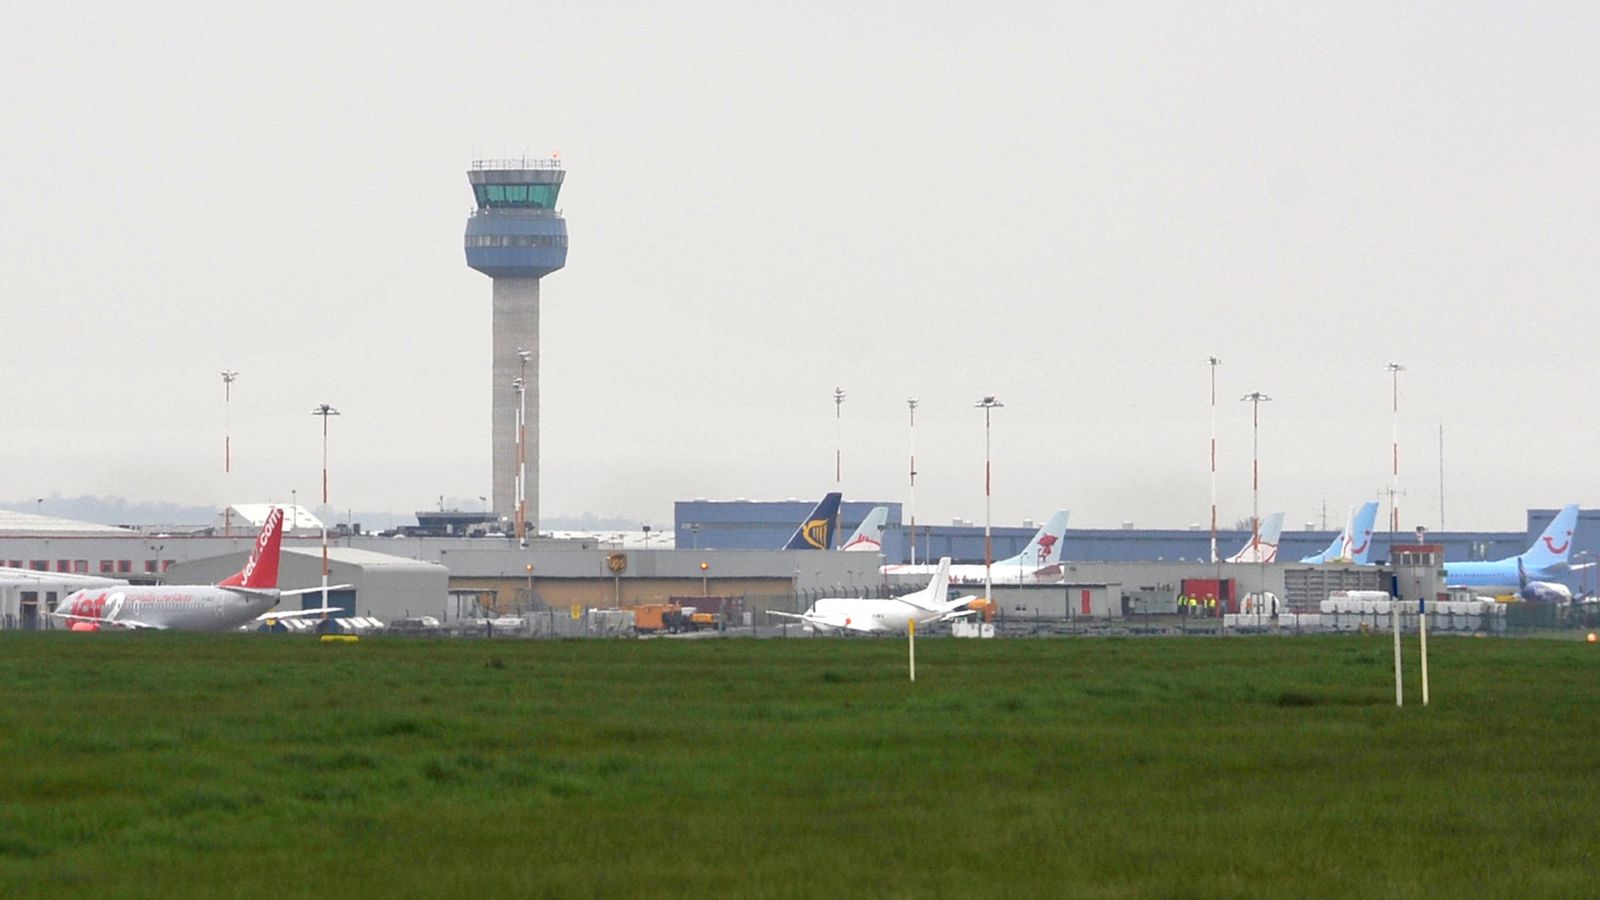 Flights diverted at East Midlands Airport after drones spotted nearby | UK News